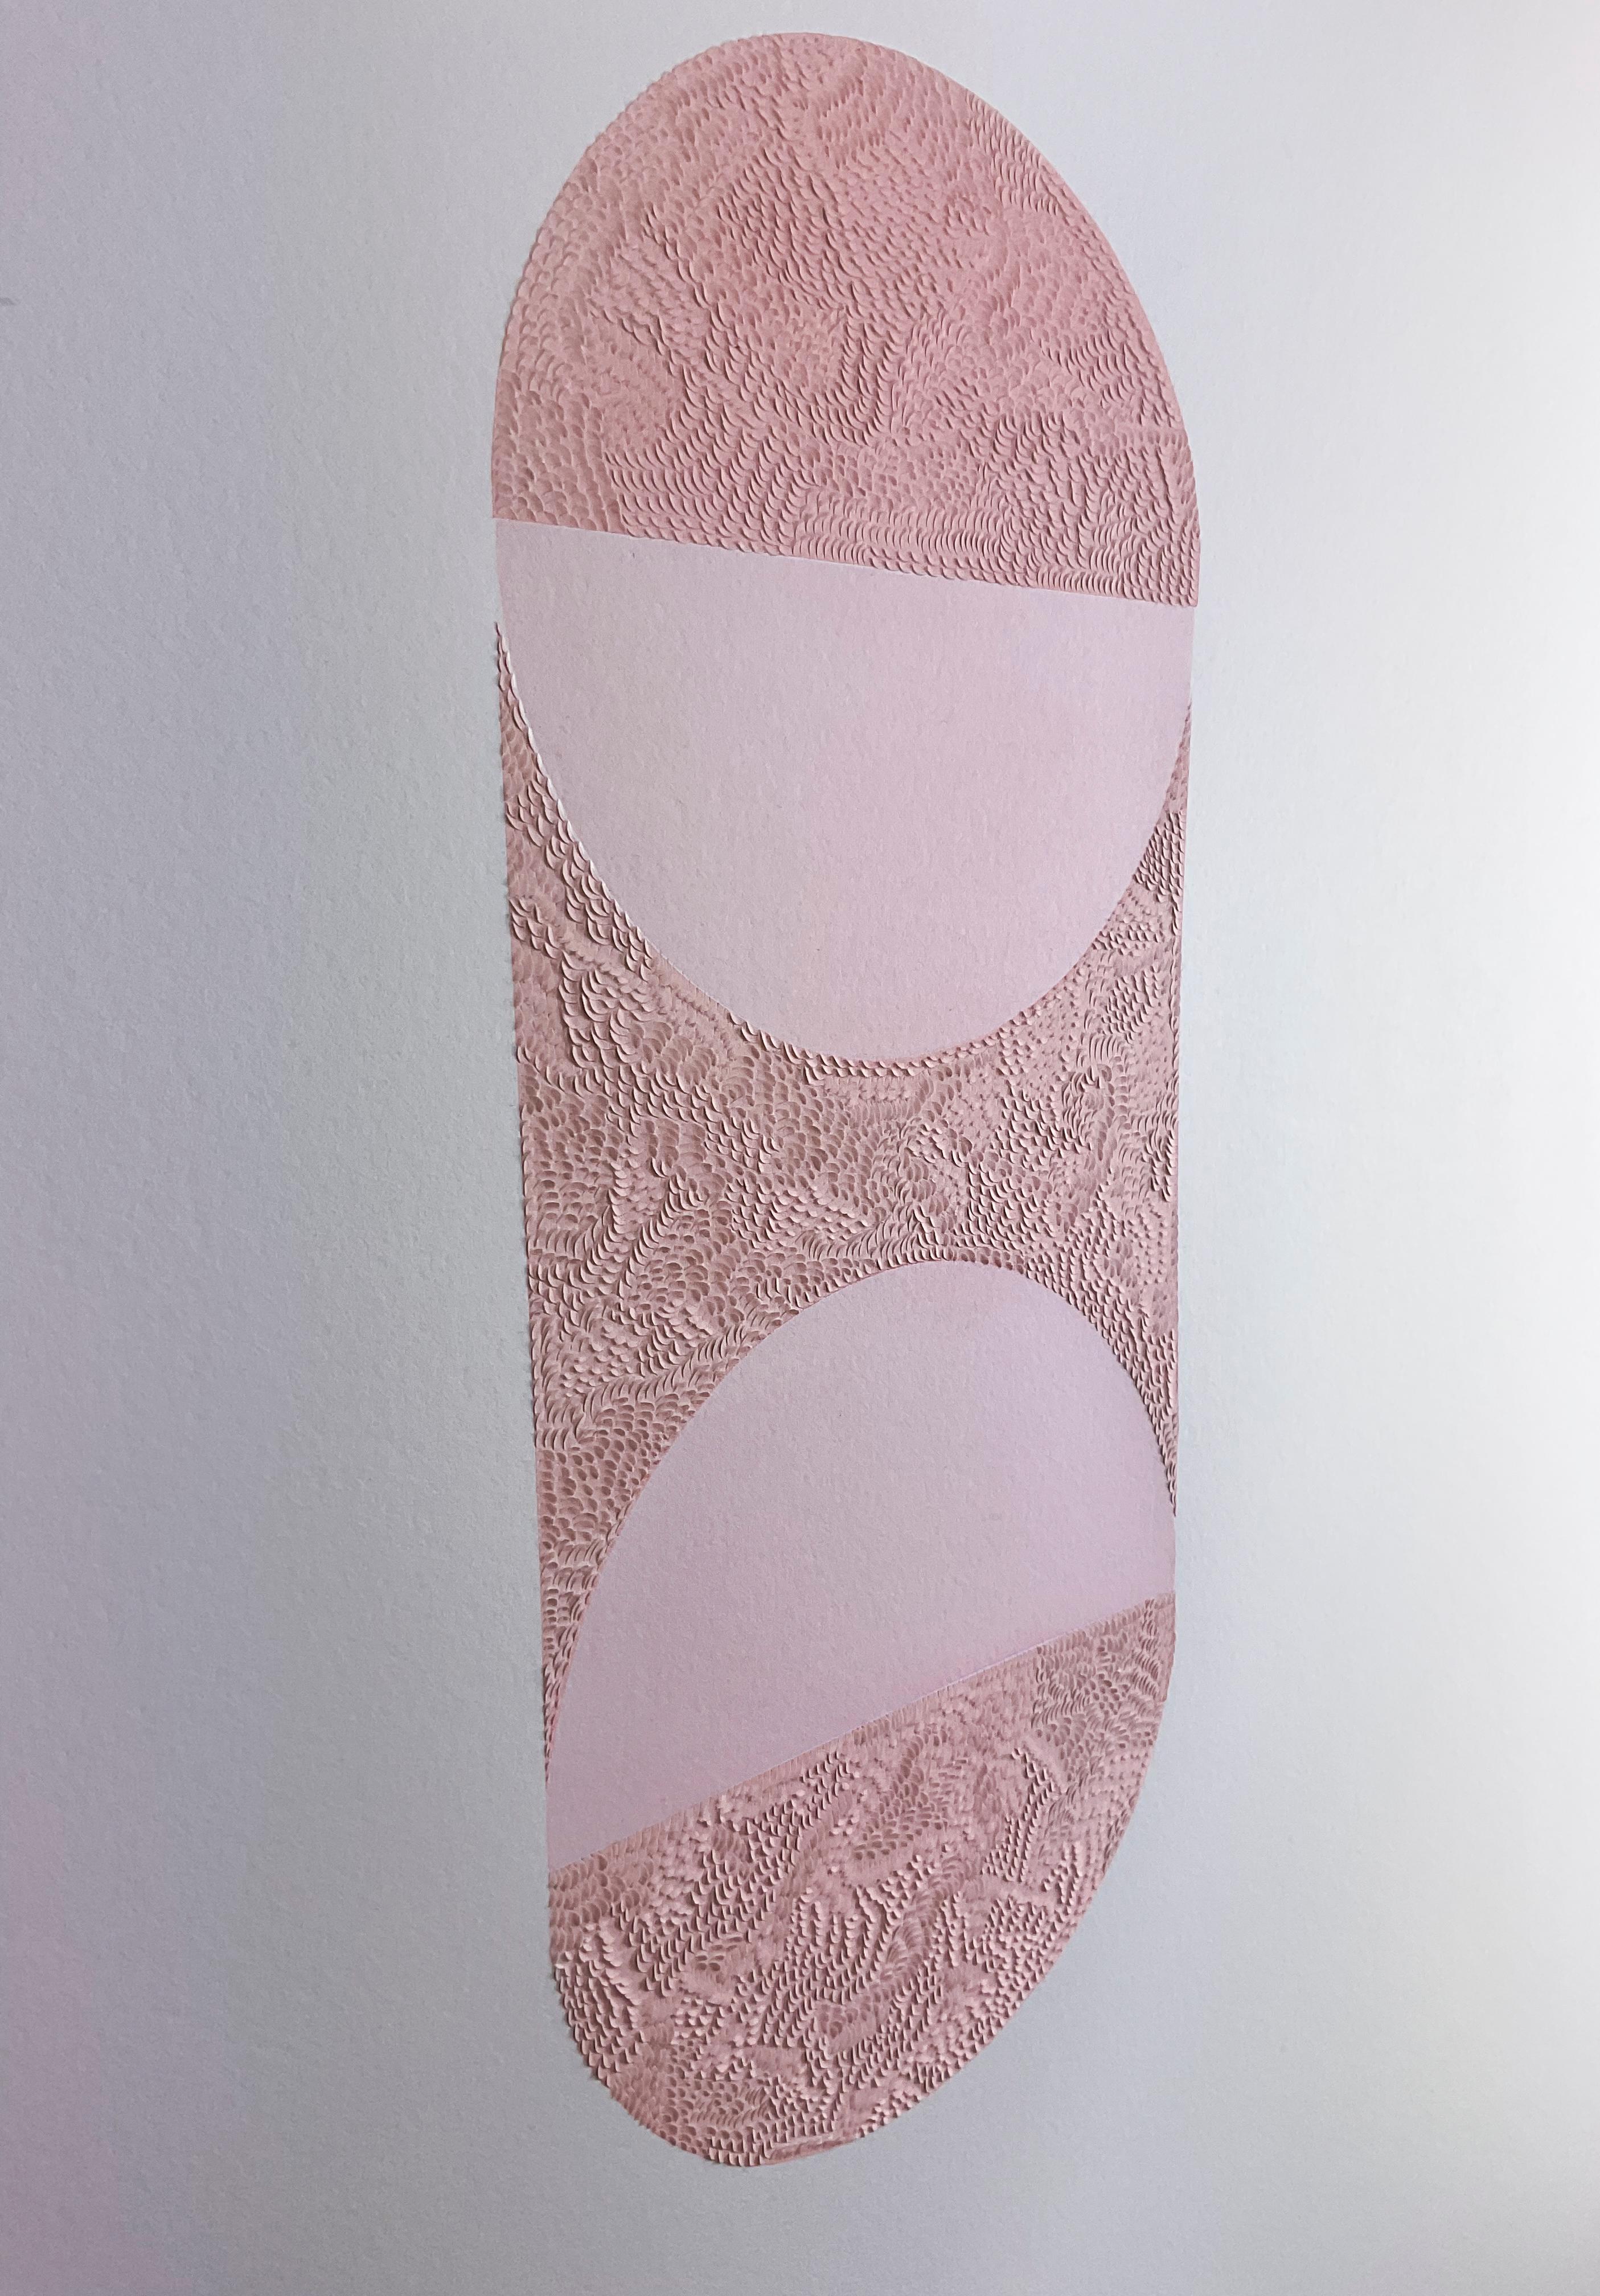 Knife Drawing XXIV - Manipulated Textured Paper with Stunning Detail (Pink) - Gray Abstract Drawing by Lucha Rodriguez